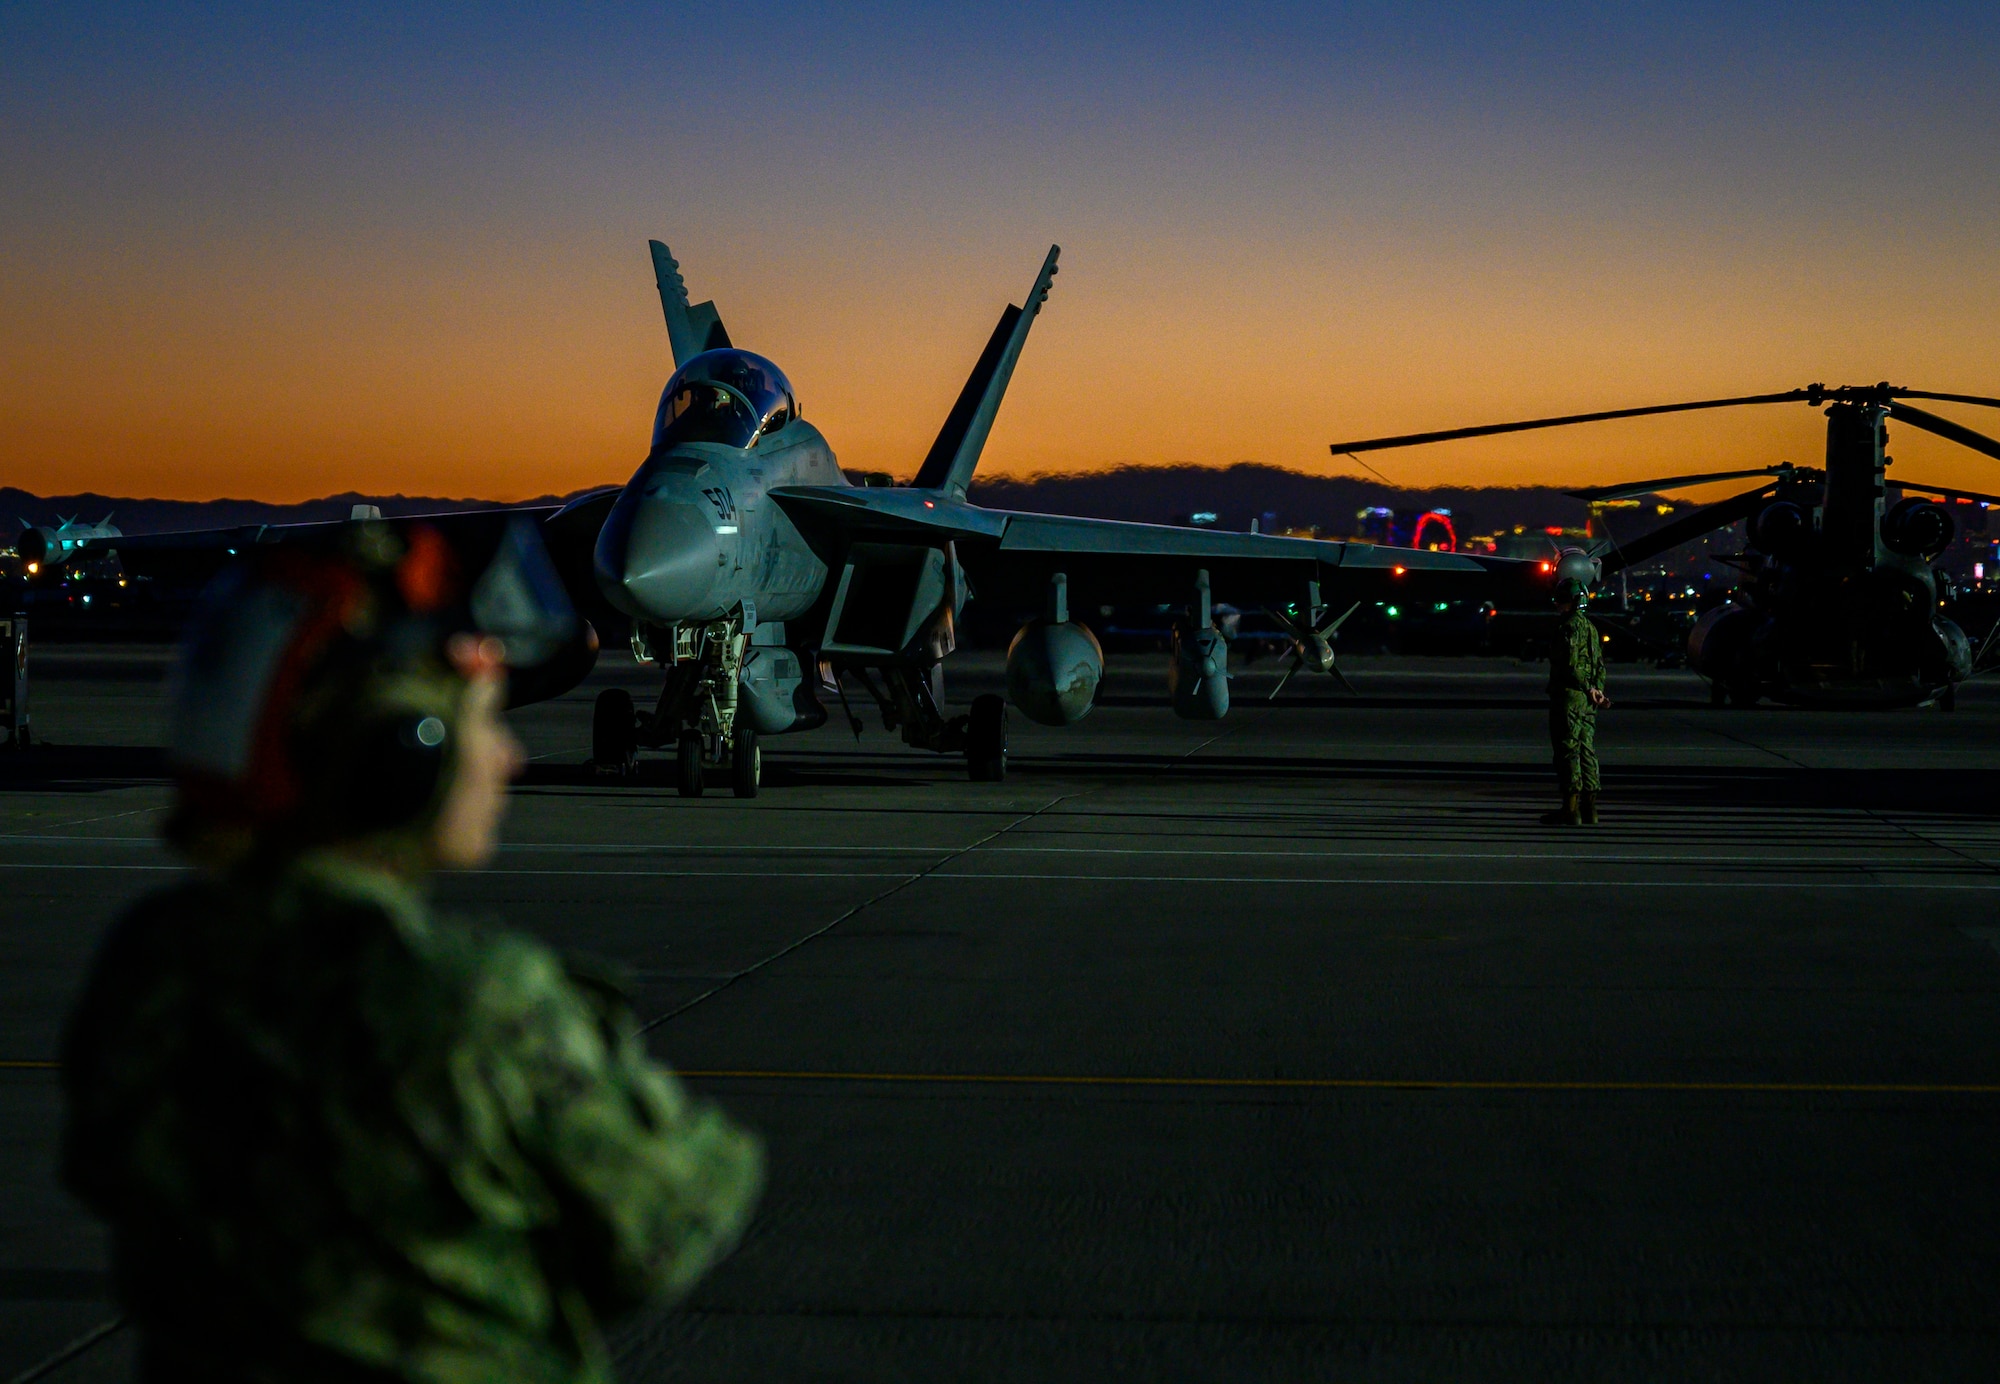 U.S. Navy Airmen stand on the flight line during take-off at night.